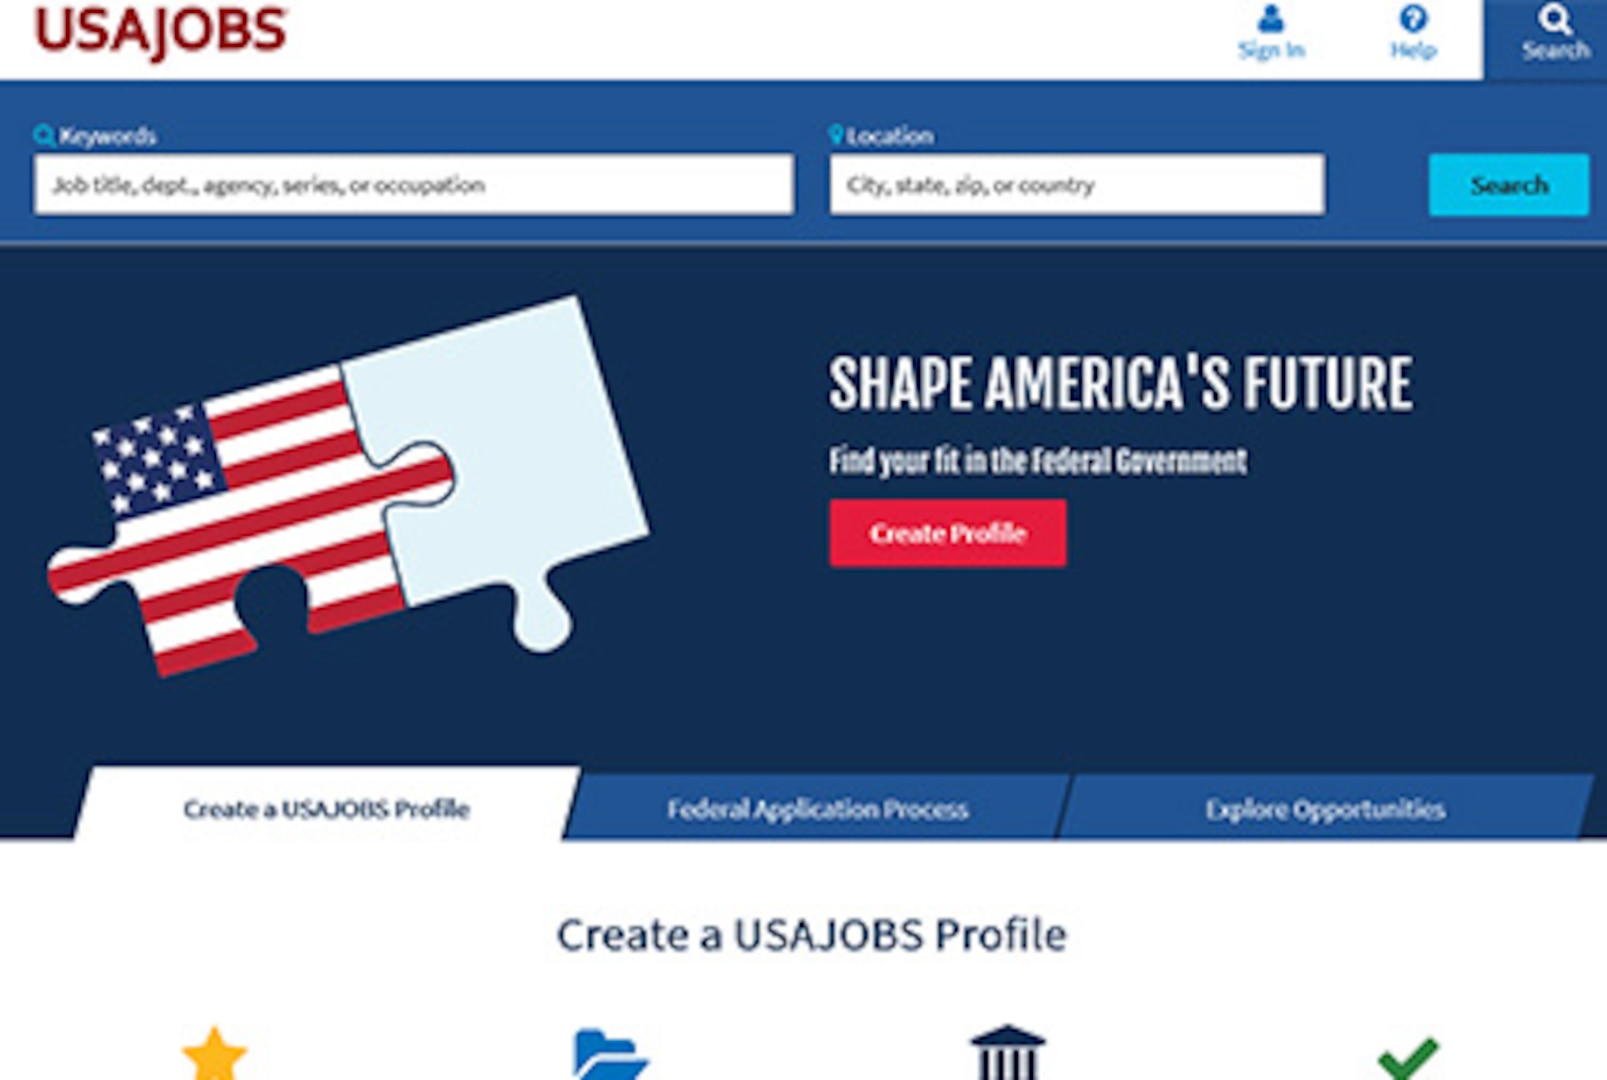 DLA uses USAJOBS.com, an Office of Personnel Management (OPM) website, to post vacancy announcements. DLA offers a wide range of career fields and intern opportunities in a variety of locations.